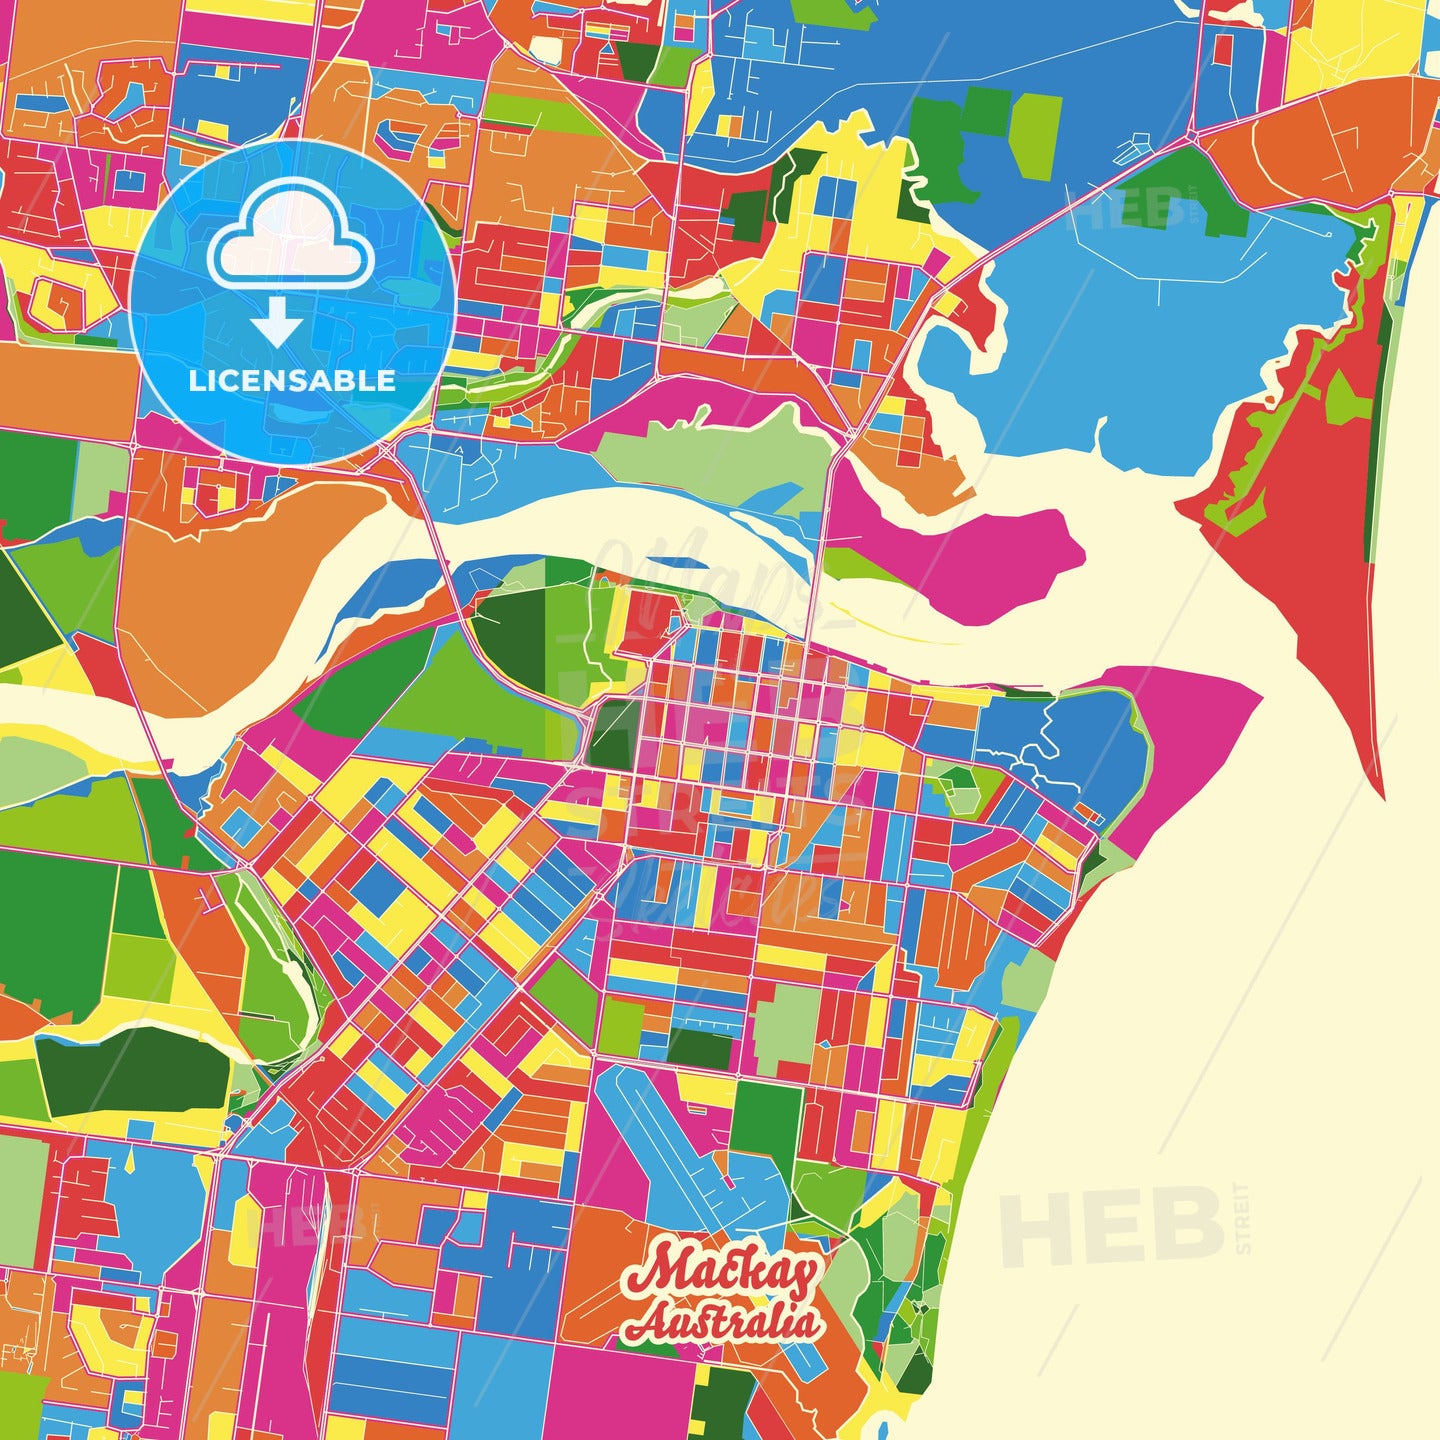 Mackay, Australia Crazy Colorful Street Map Poster Template - HEBSTREITS Sketches